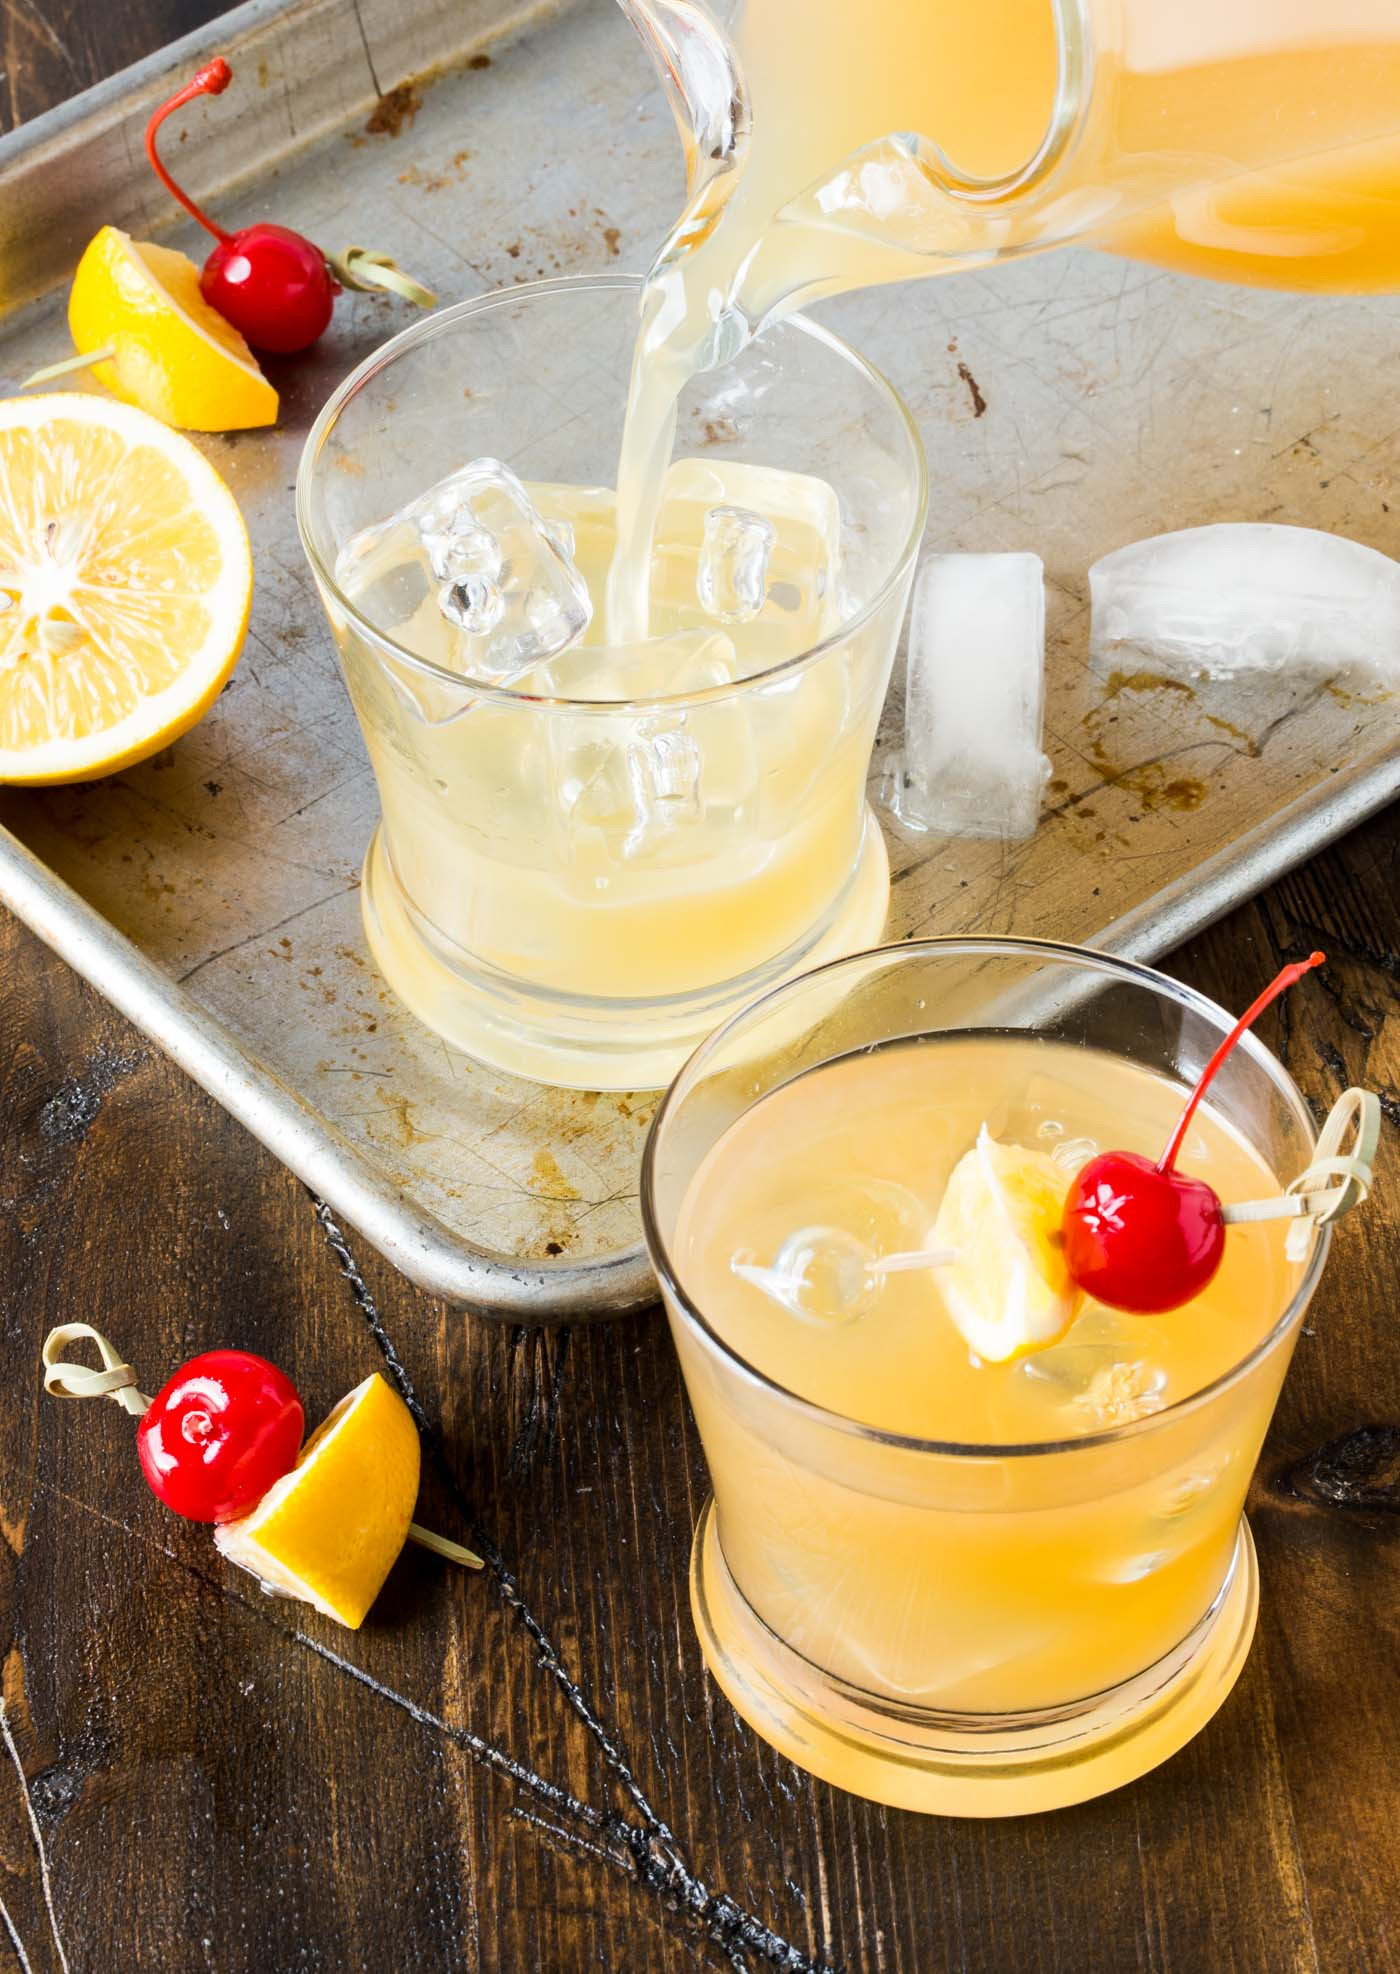 Best Whiskey Cocktails
 The 17 Best Whiskey Drinks You Can Make at Home